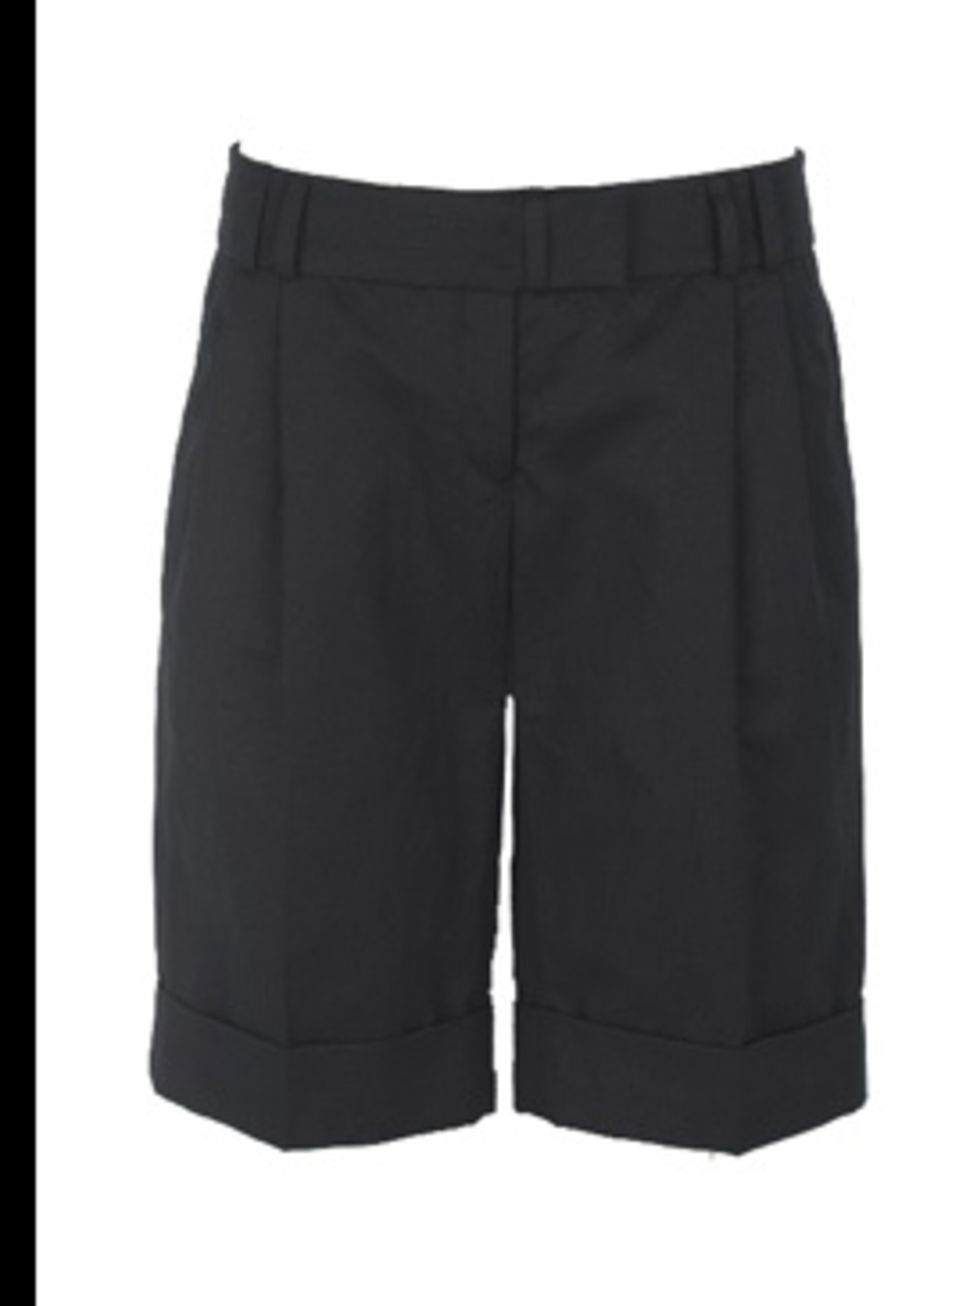 <p>Black cuffed shorts, £65, by <a href="http://www.tedbaker.com/shop.do?cID=591&amp;pID=5864">Ted Baker</a></p>